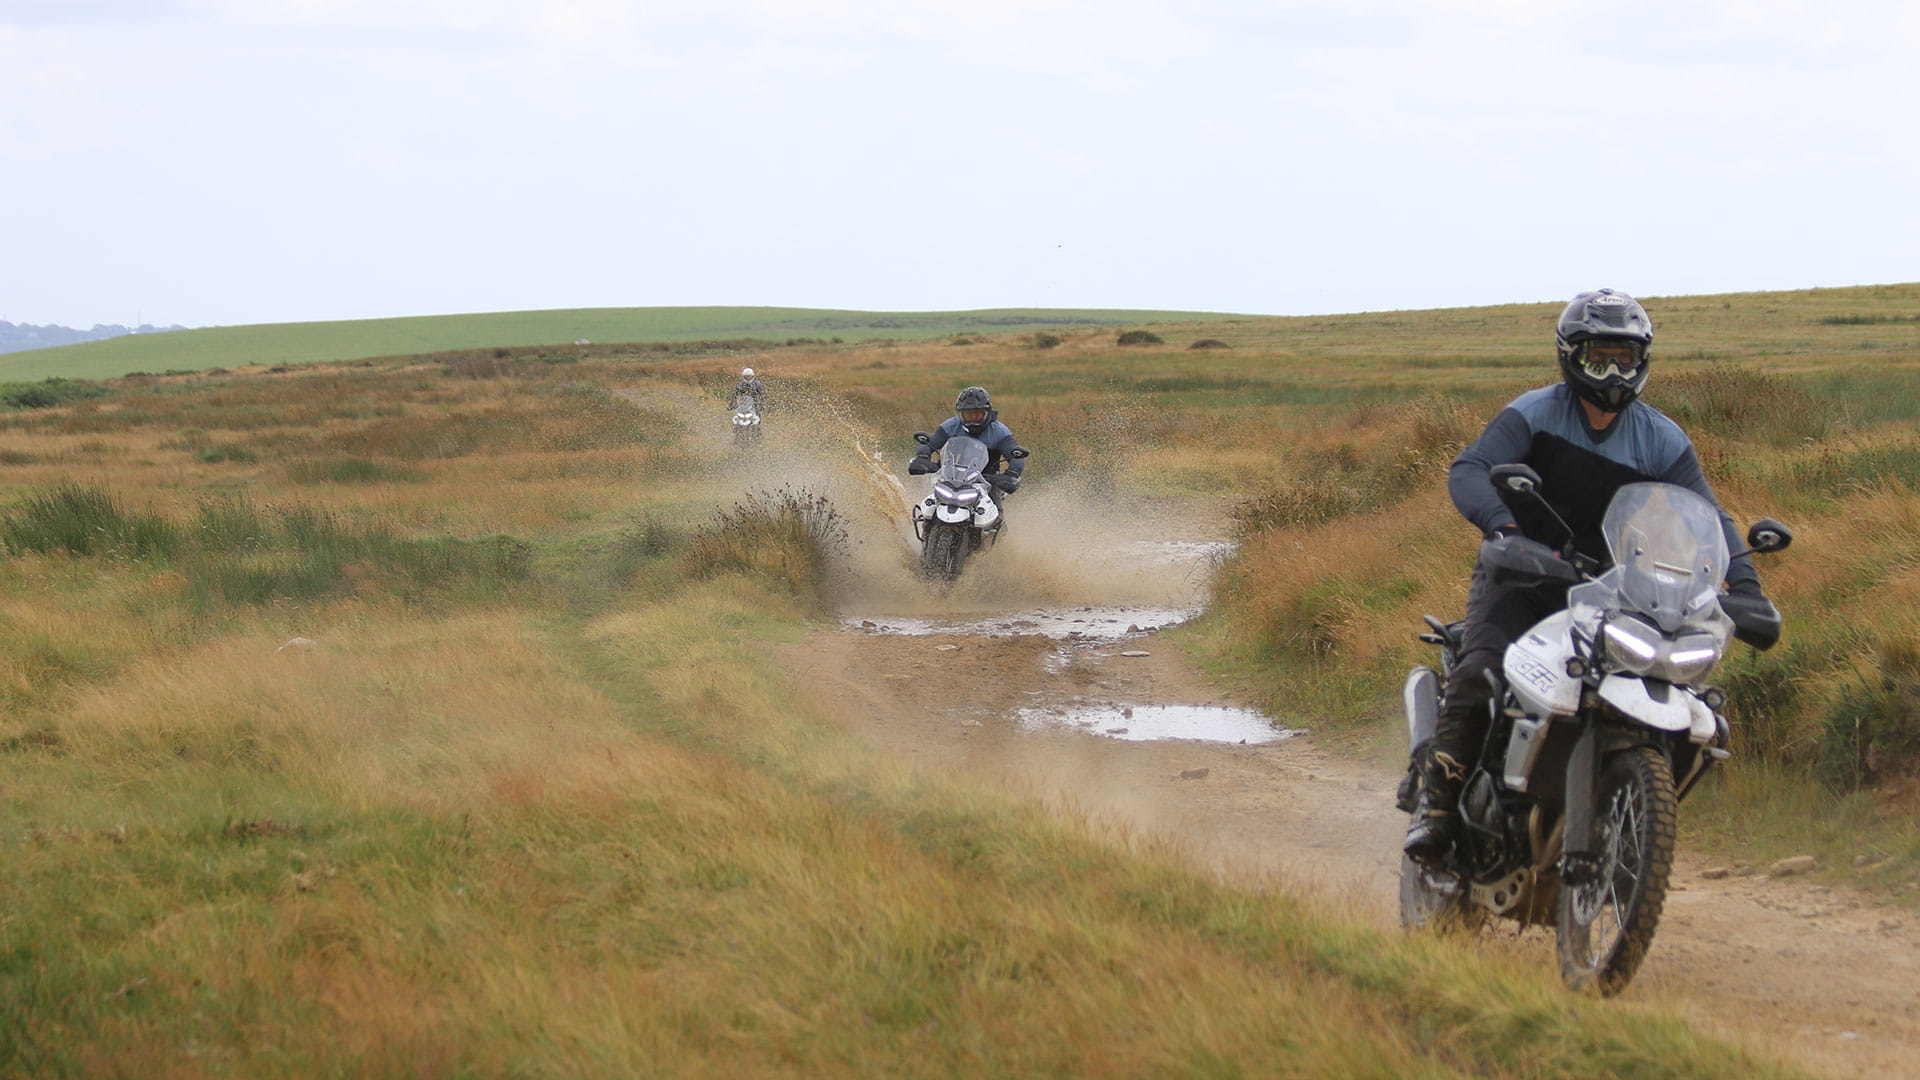 Triumph Tiger experience day with riders going through varied terrains